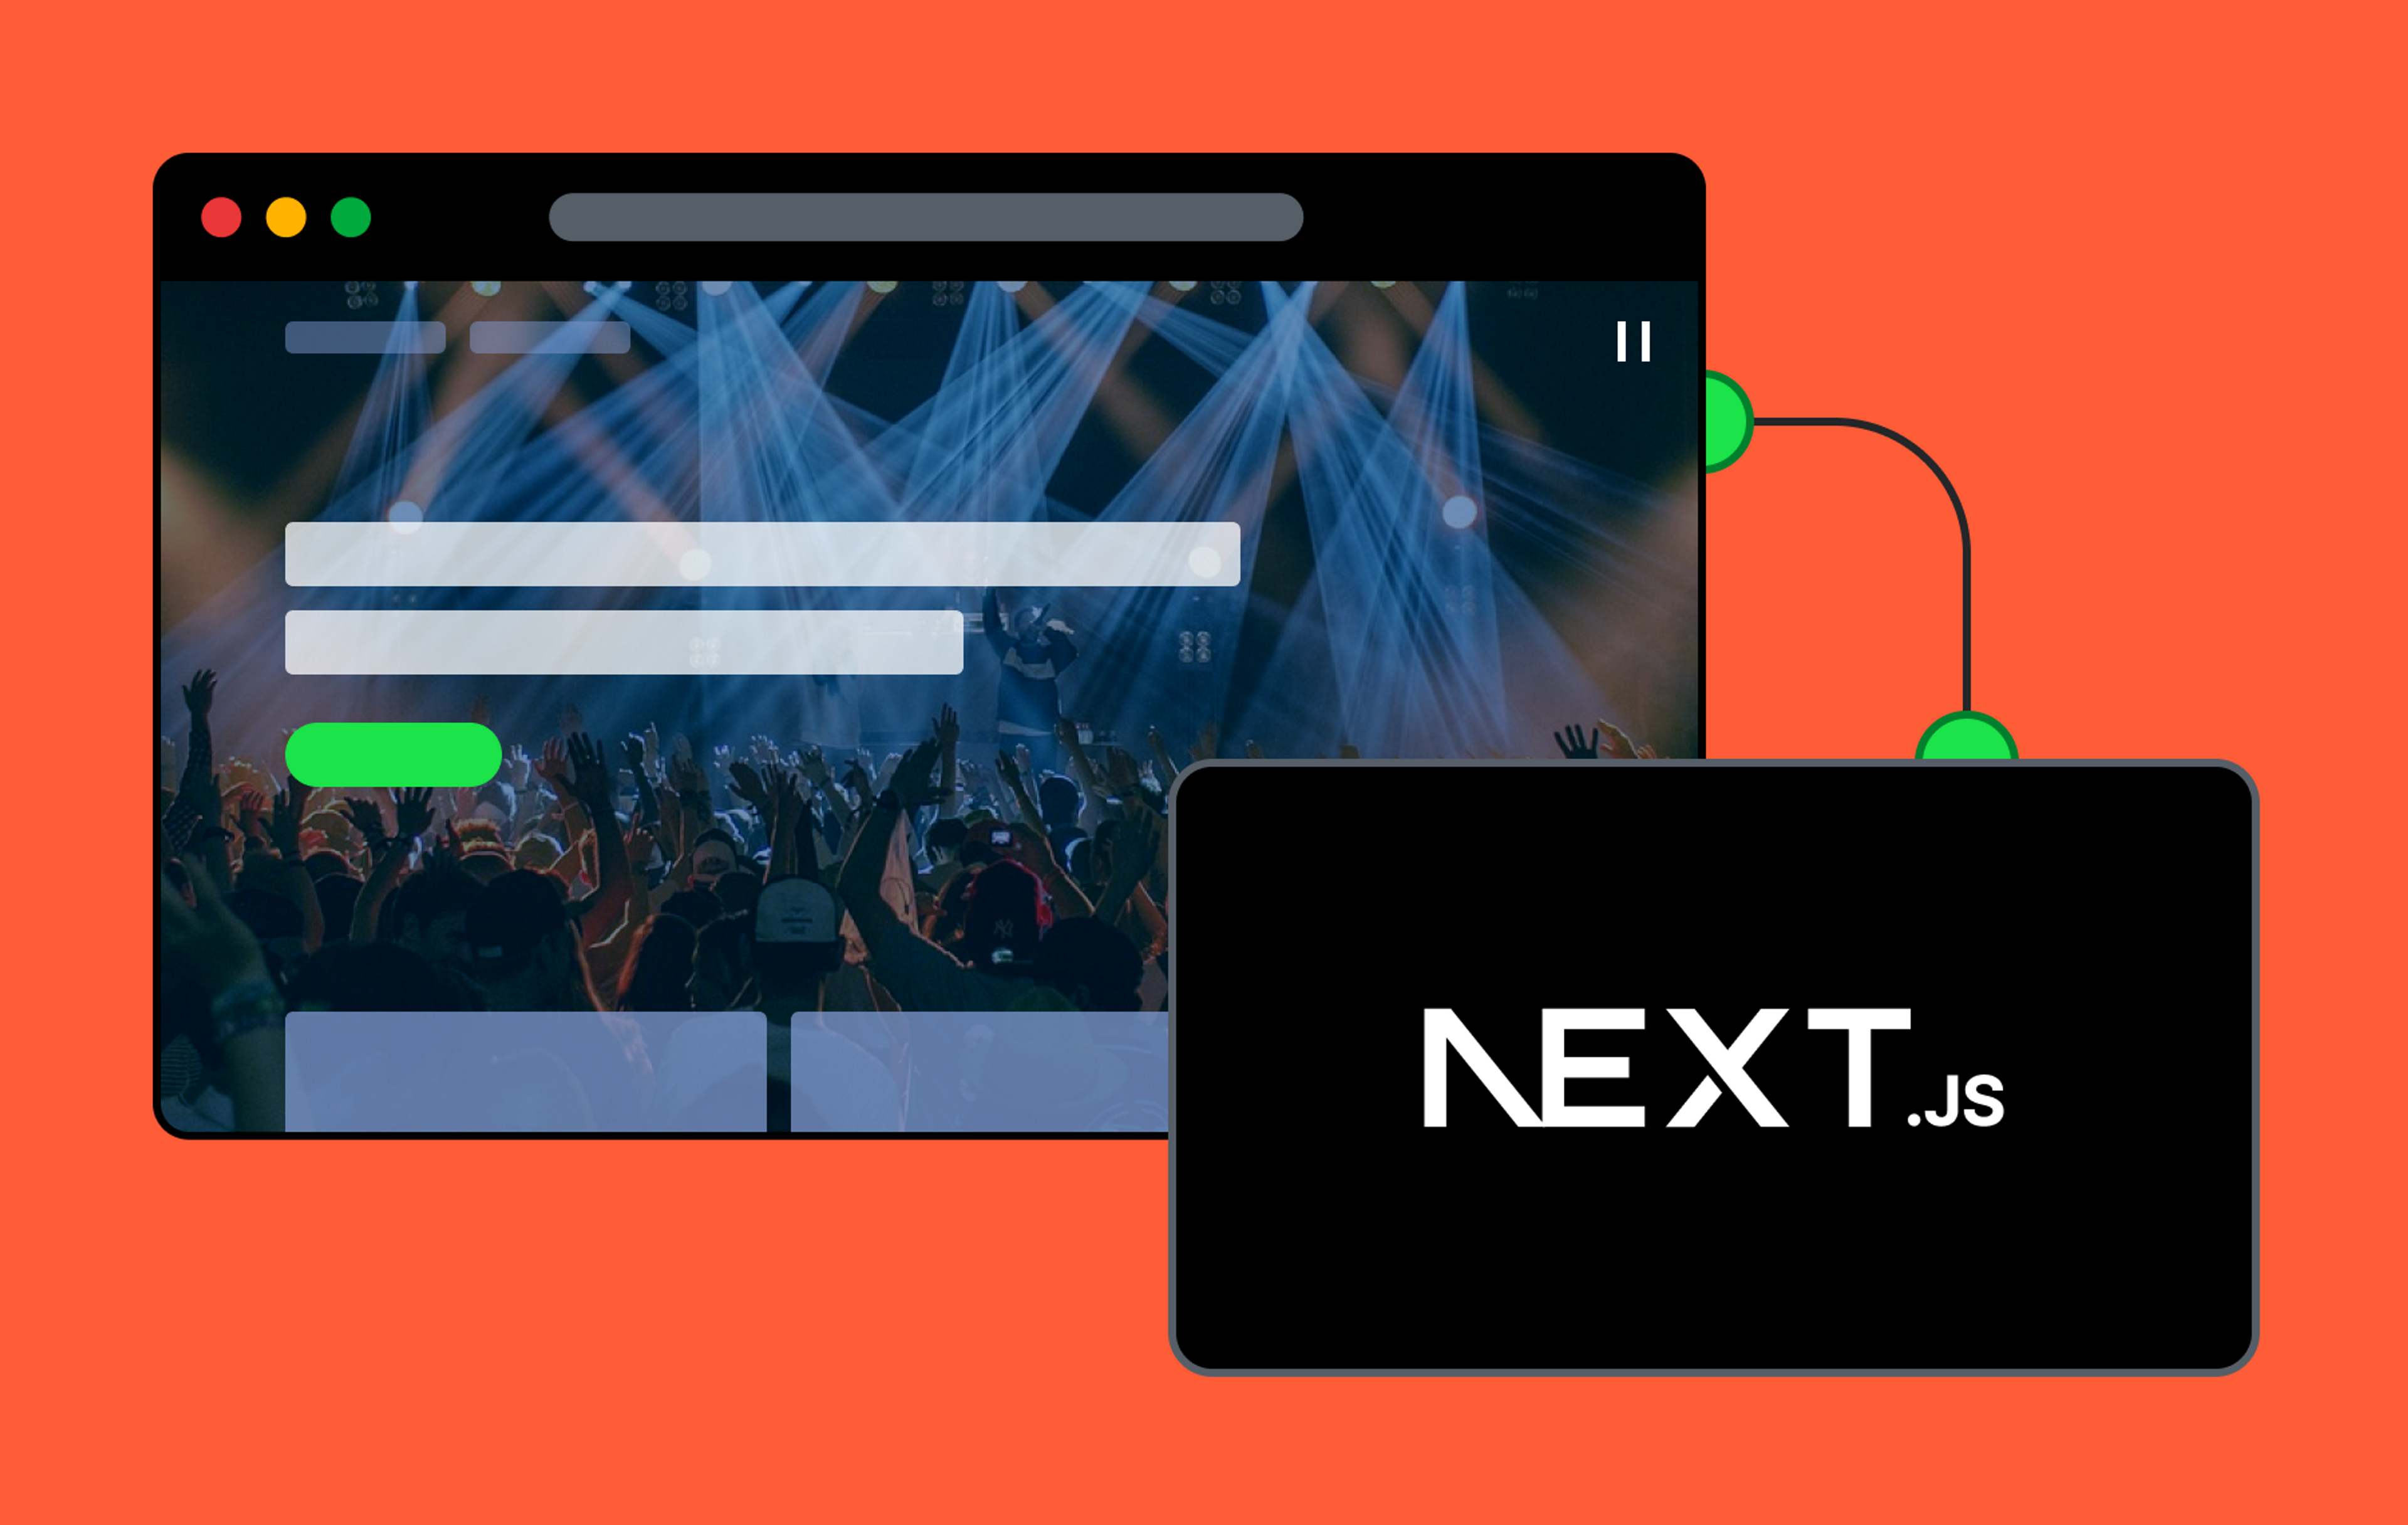 The image is a graphic design with a browser window showing a concert scene on the left and a screen with "NEXT.js" on the right, connected by a green line, against an orange background.